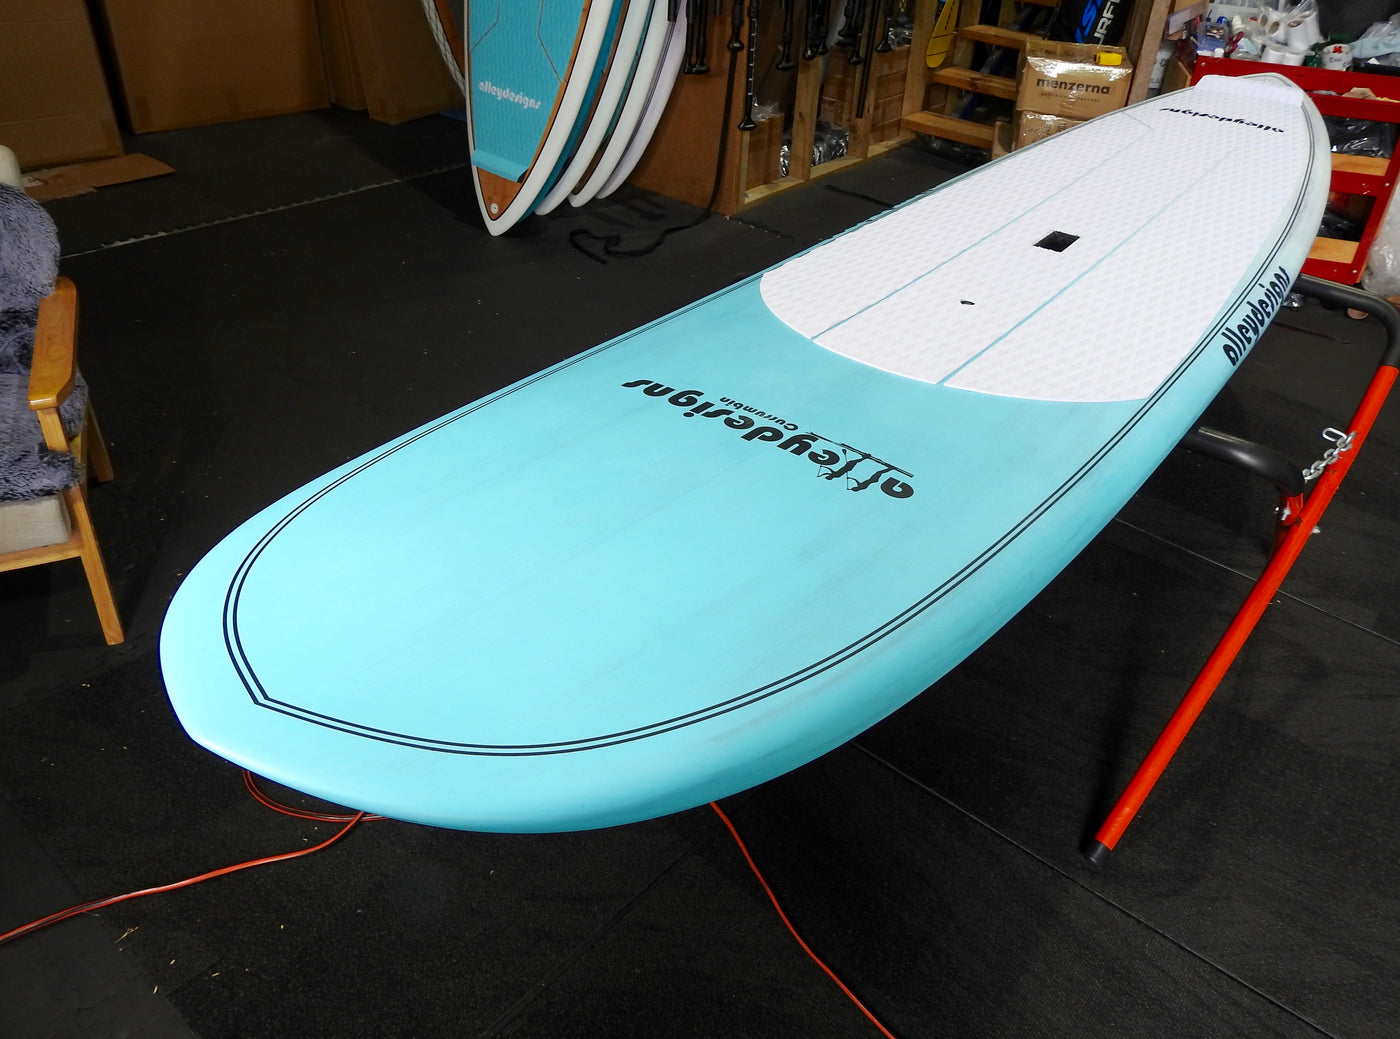 10' X 29" BLUE Carbon Performance Surf SUP - Alleydesigns  Pty Ltd                                             ABN: 44165571264